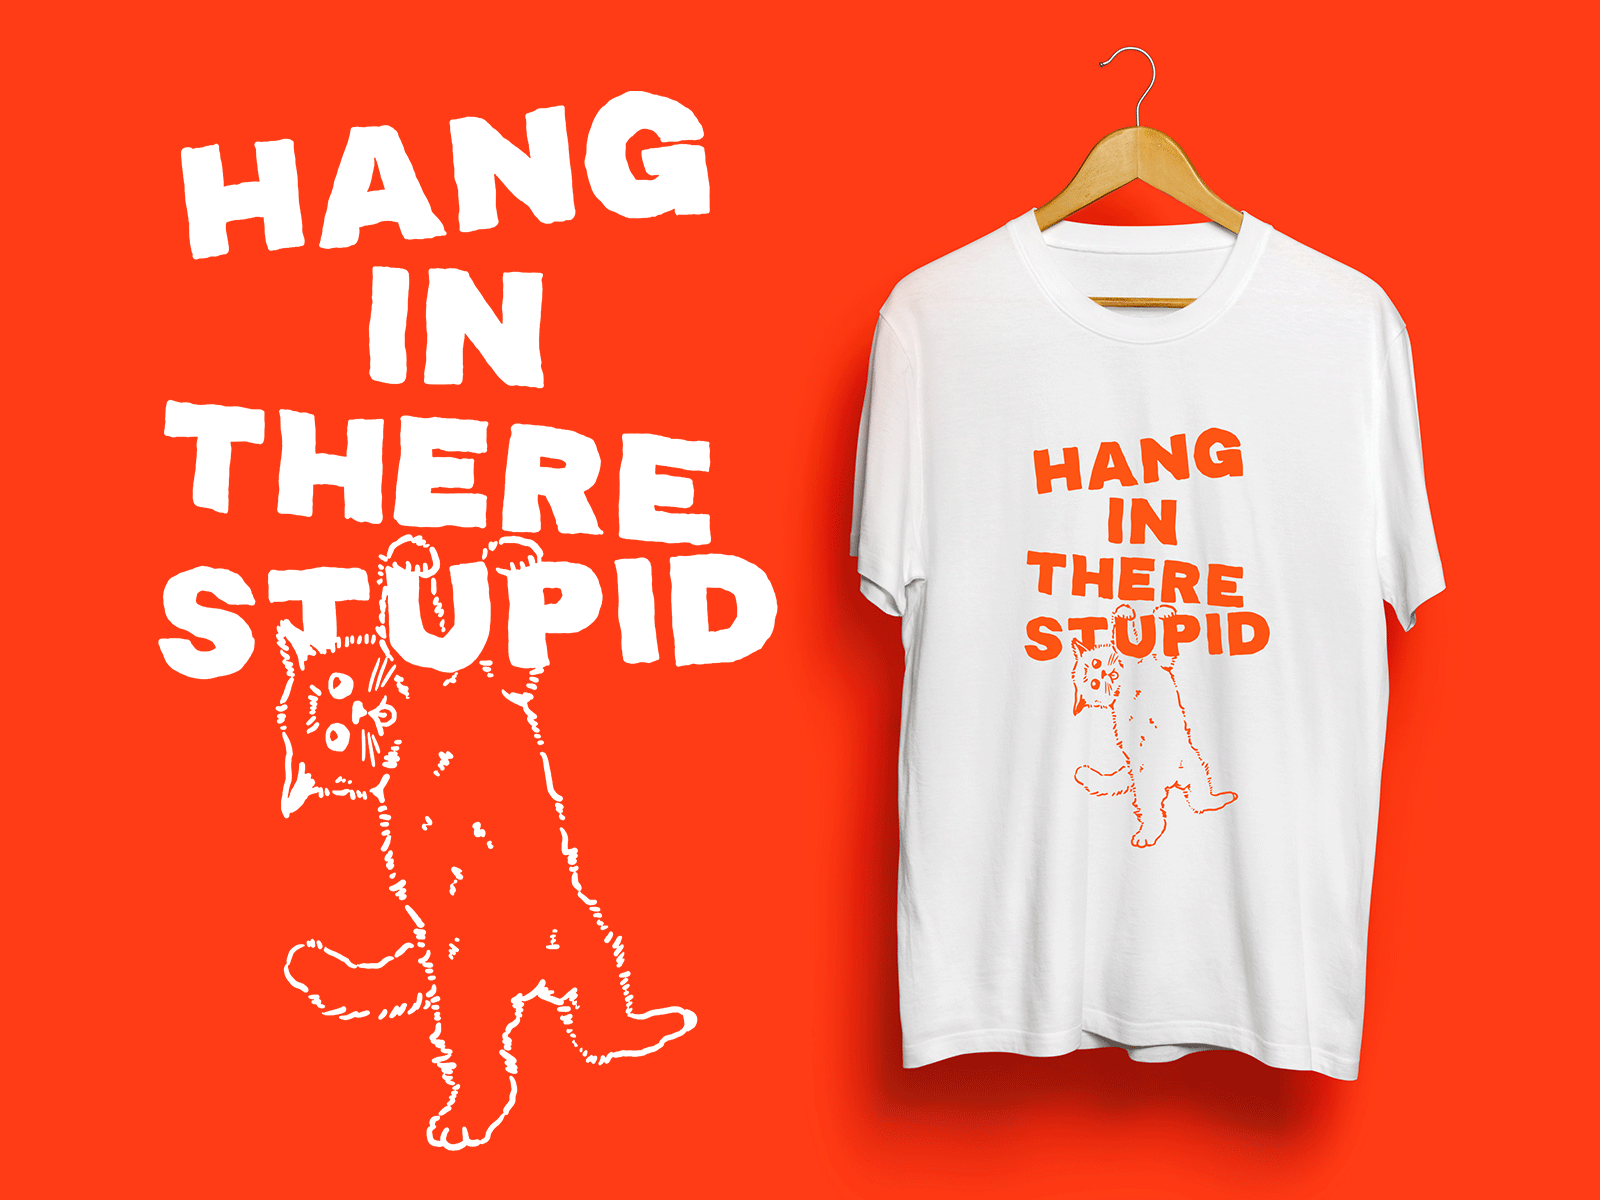 HANG IN THERE STUPID cat drawn handmade handmade font illustration kitsch kitty minimal red shirt simple tee typography vintage